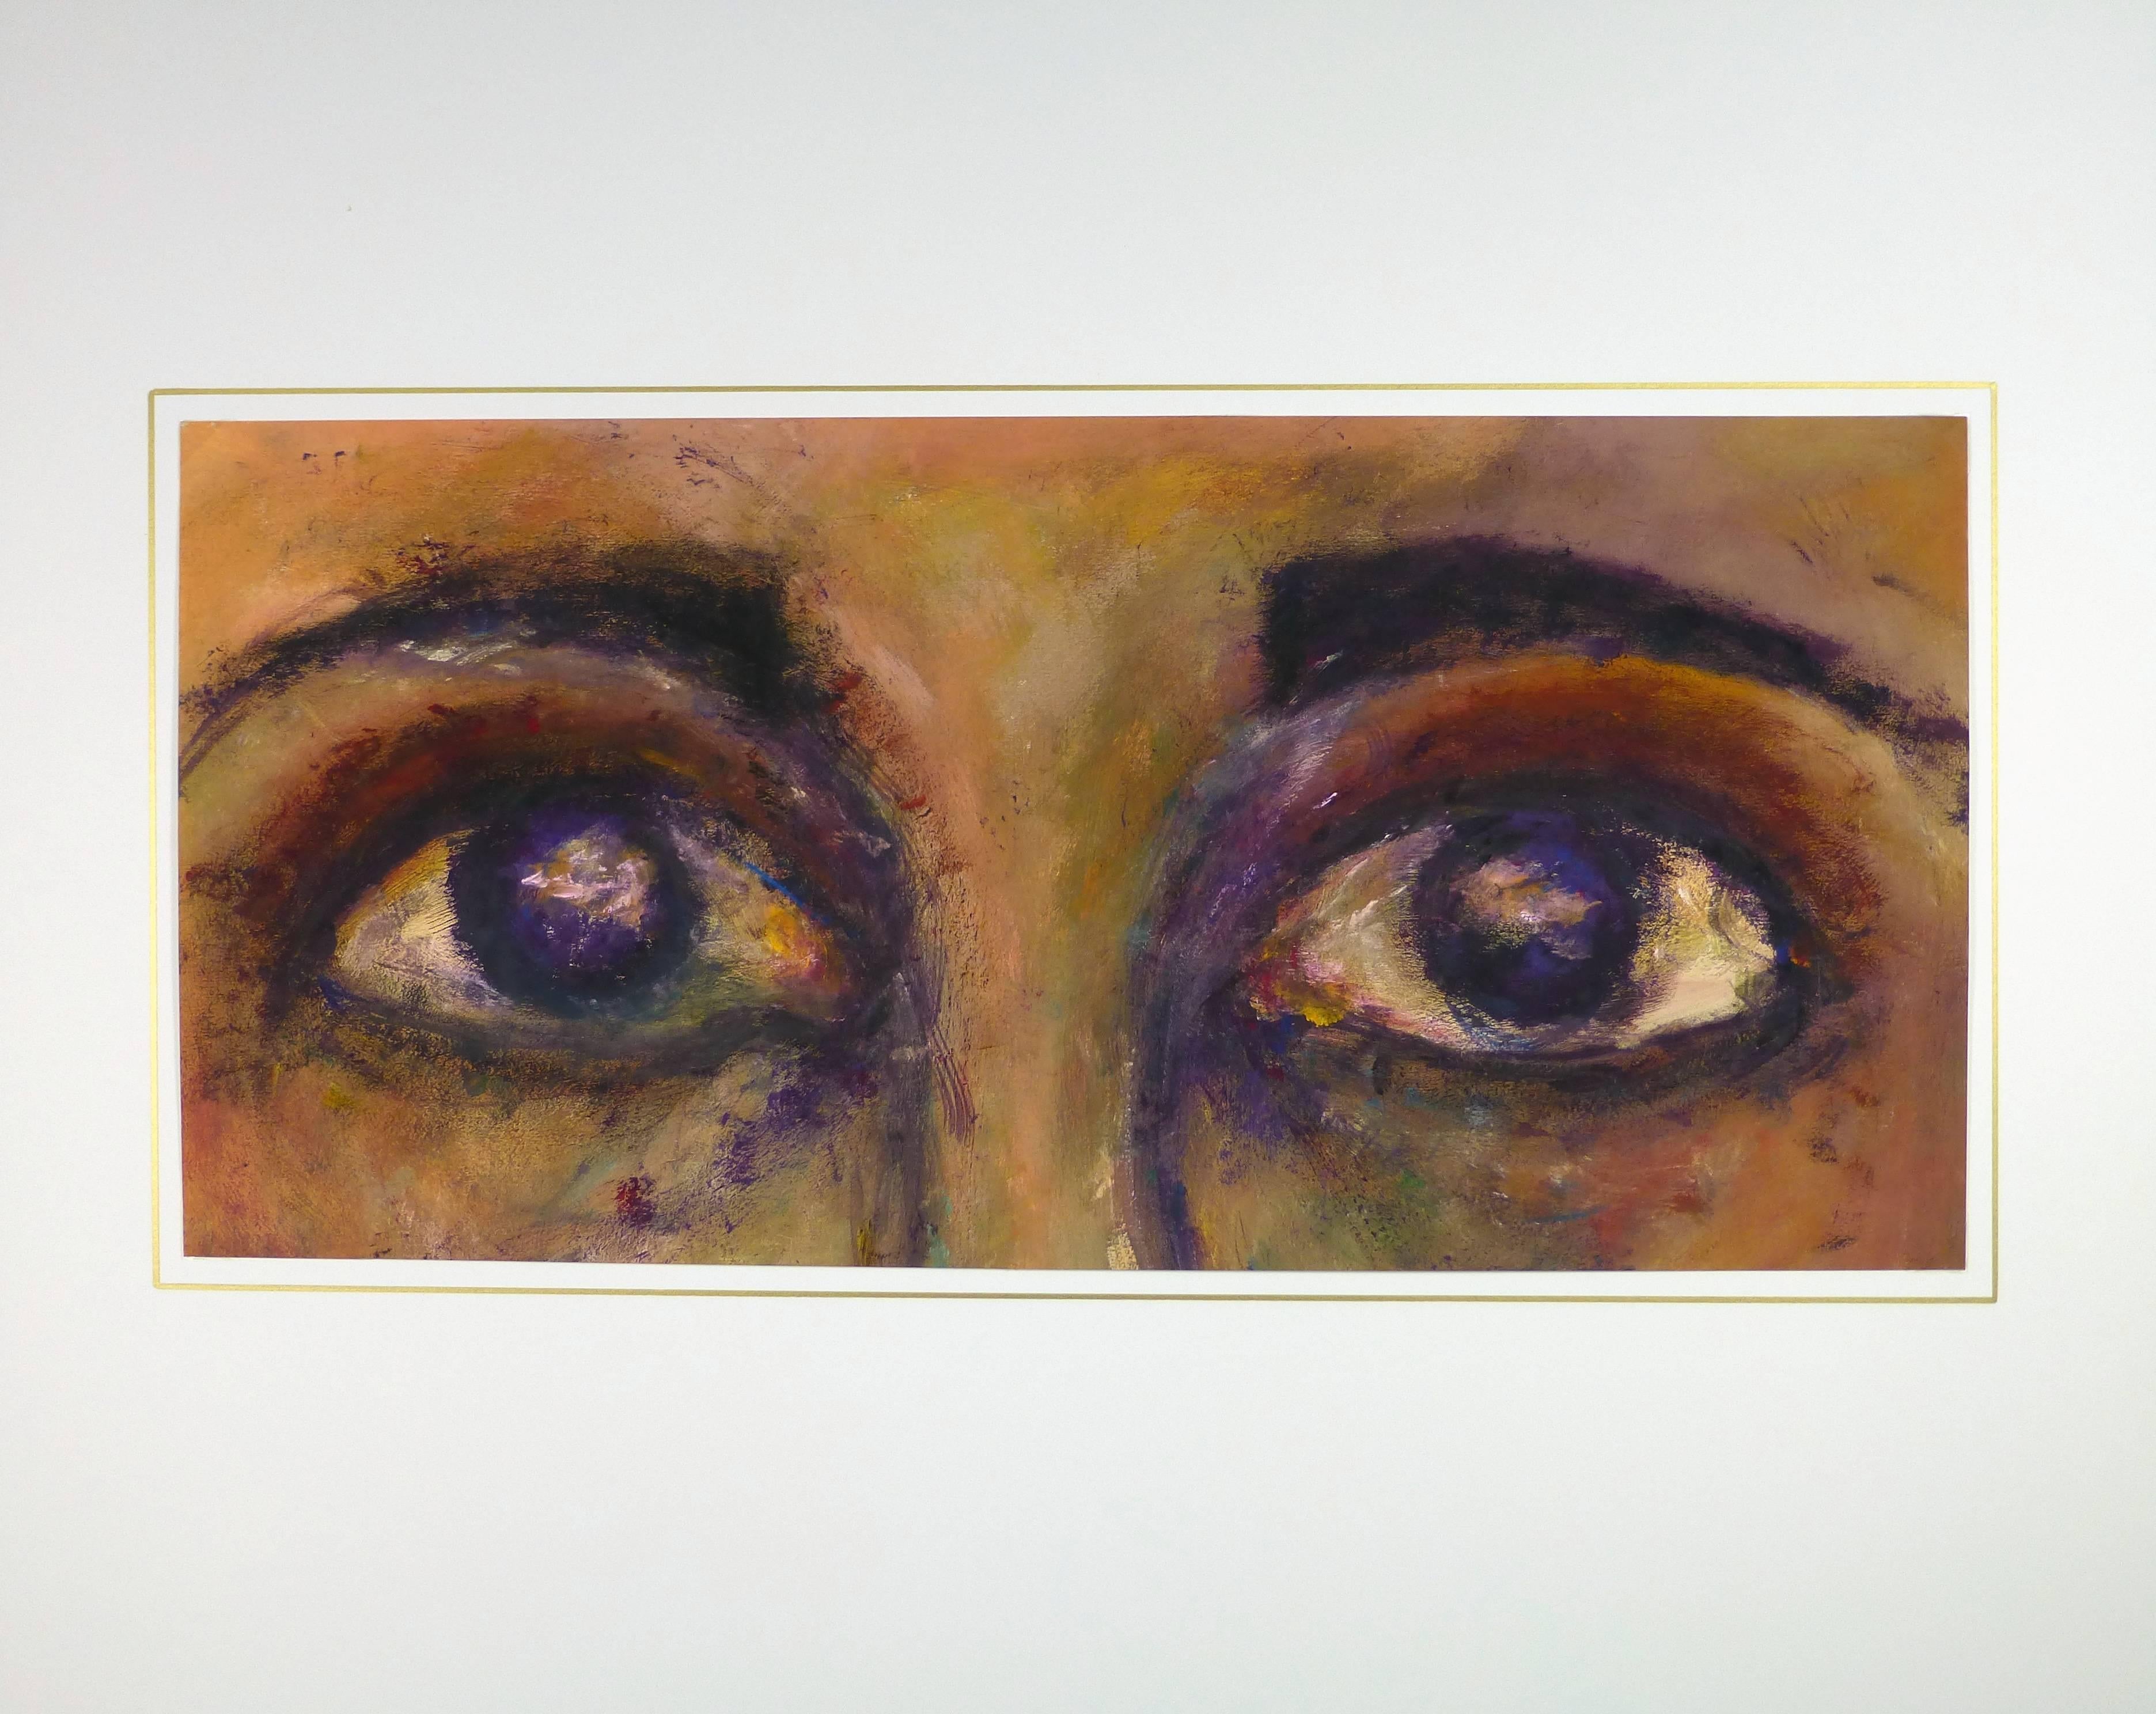 Close Up of Eyes in Oil - Brown Figurative Painting by Unknown